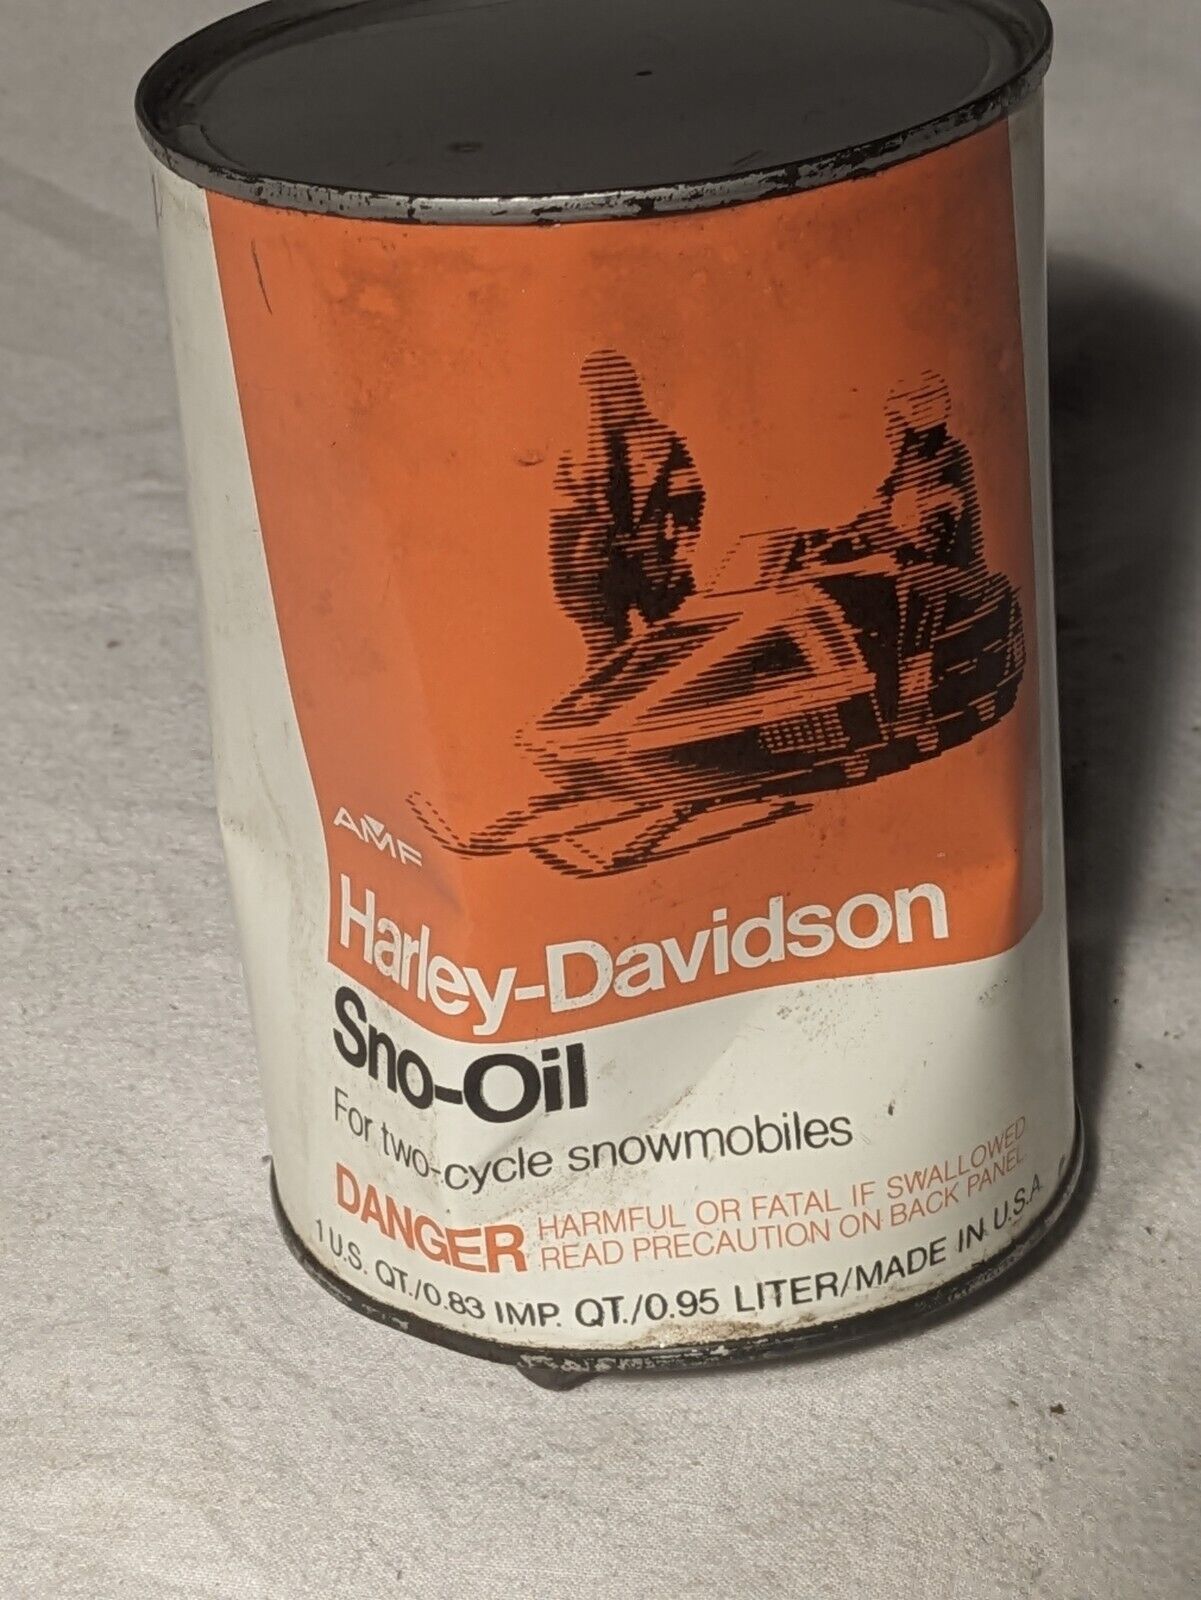 Very Rare Vintage Harley Davidson Two Cycle Sno-Oil Snowmobile Oil Can FULL 